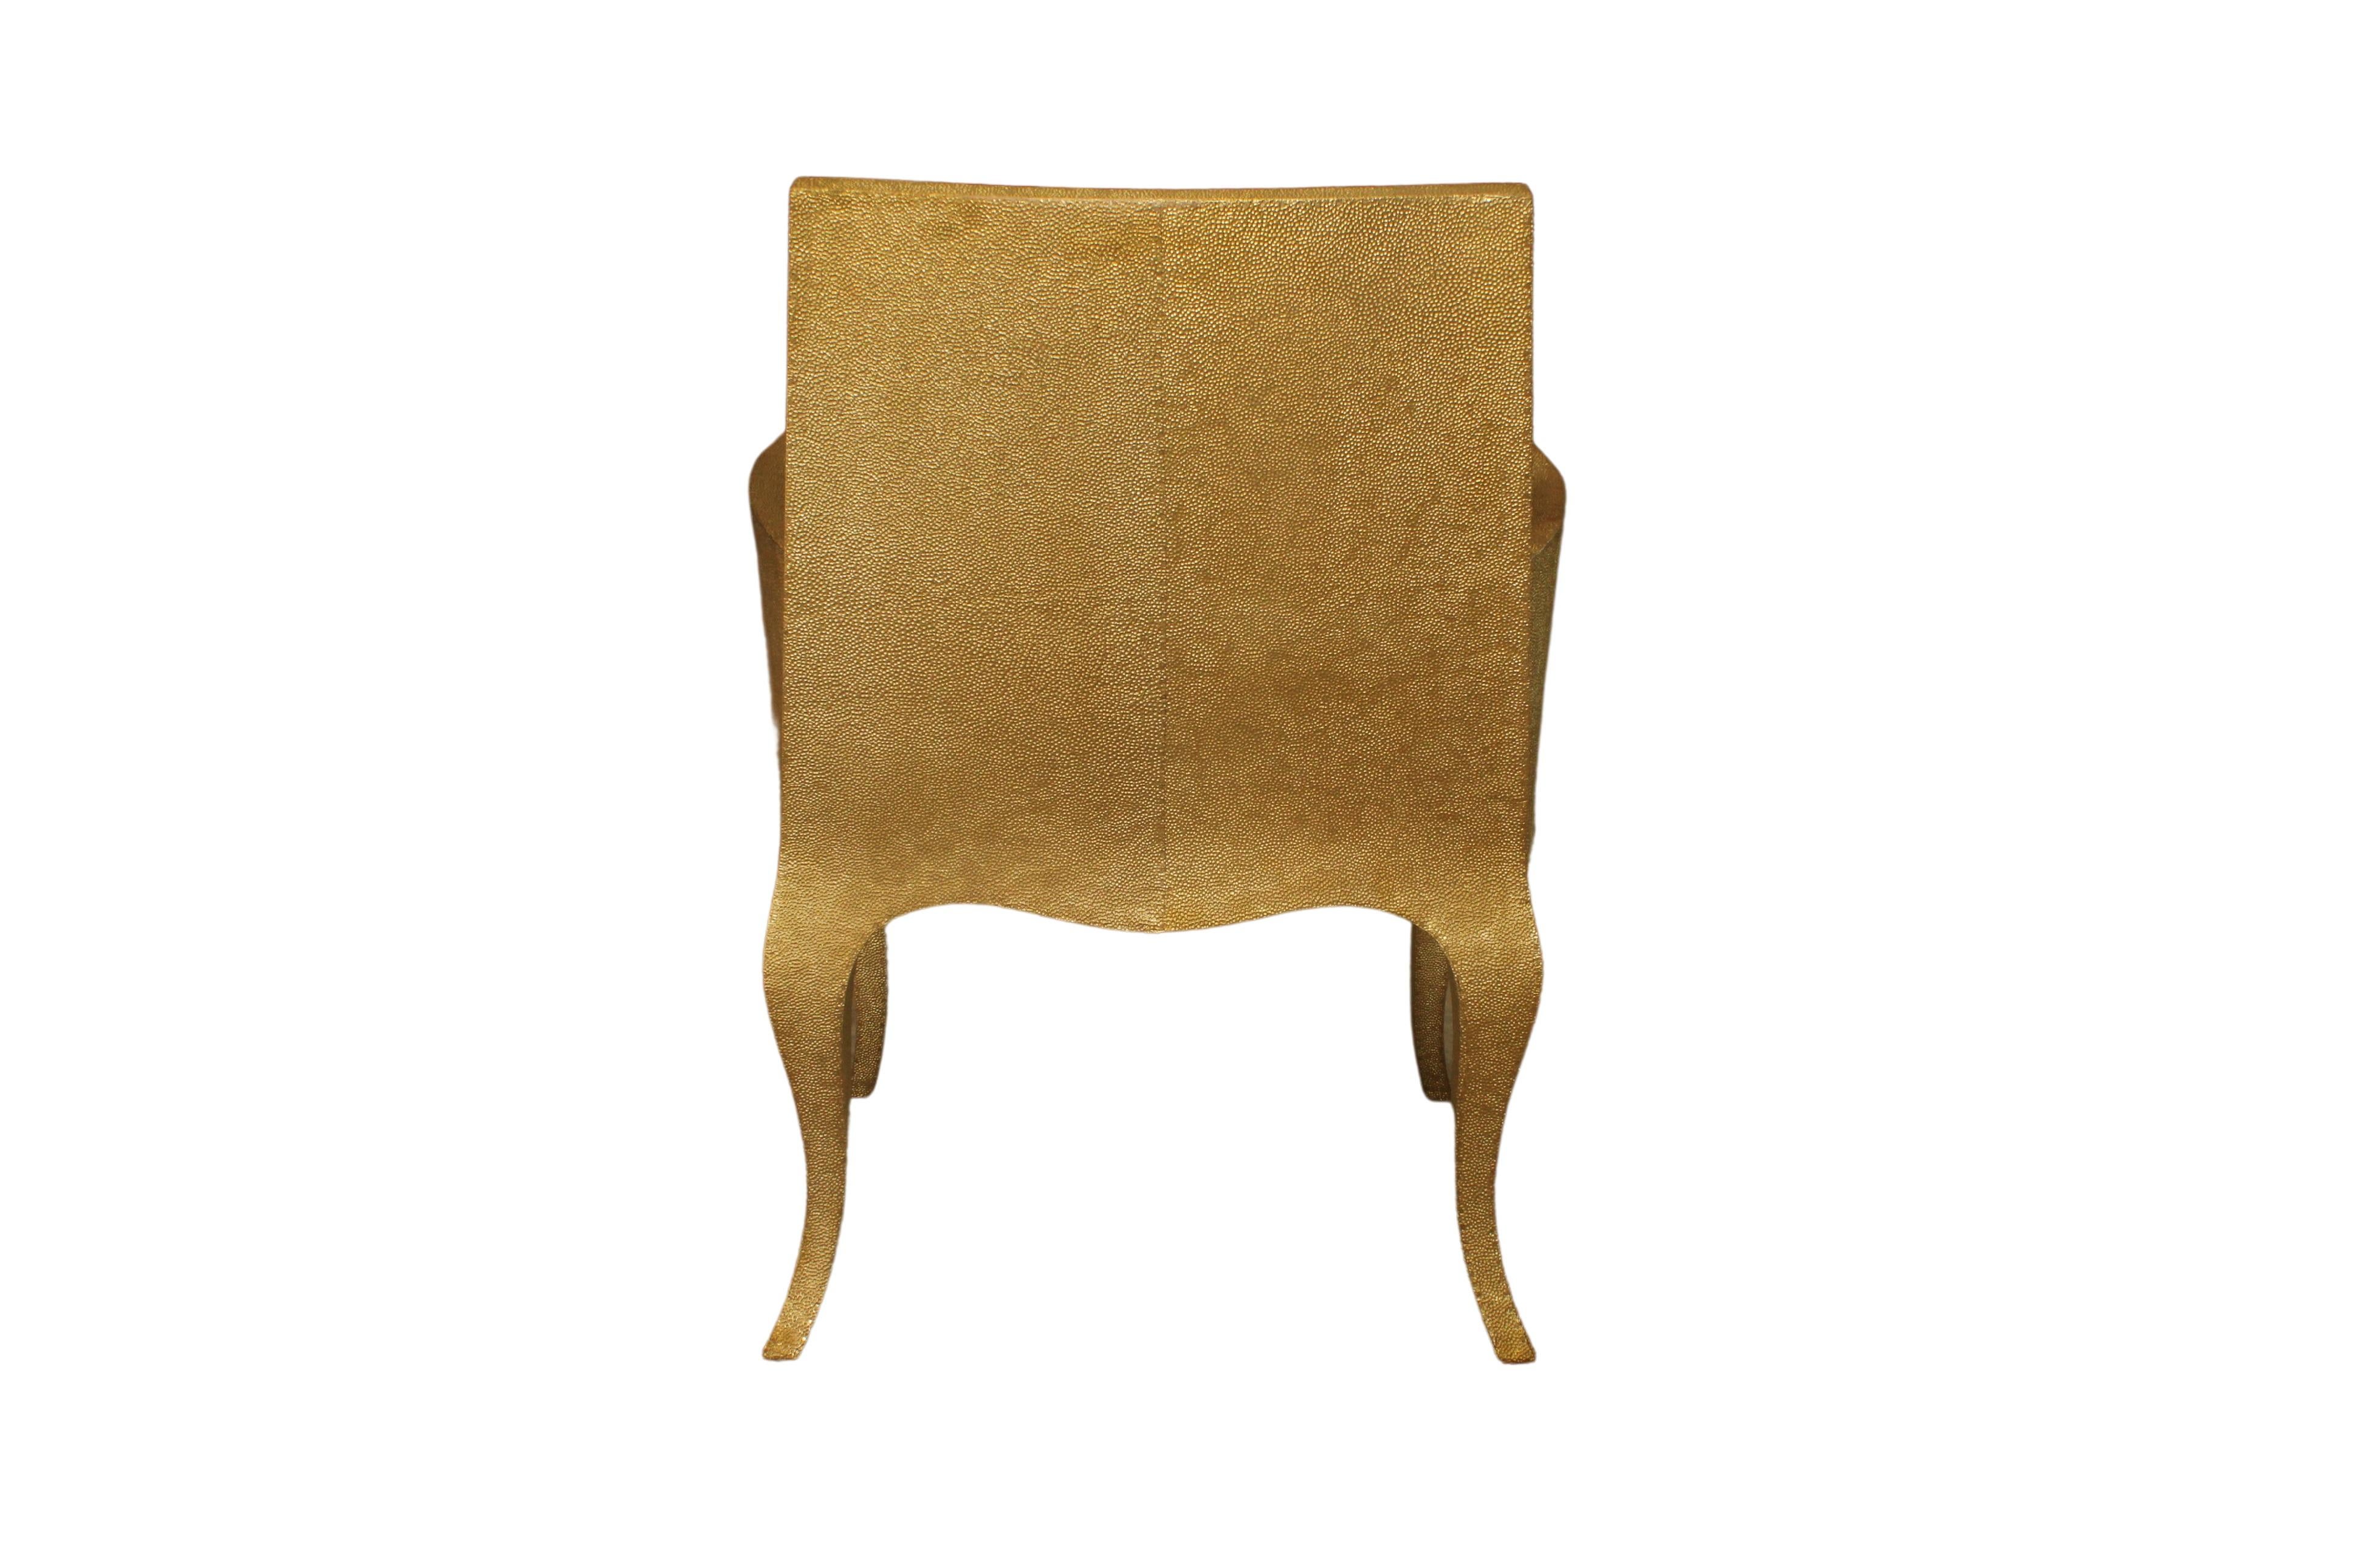 Contemporary Louise Club Chair in Medium Hammered Brass Over Teak Wood by Paul Mathieu  For Sale